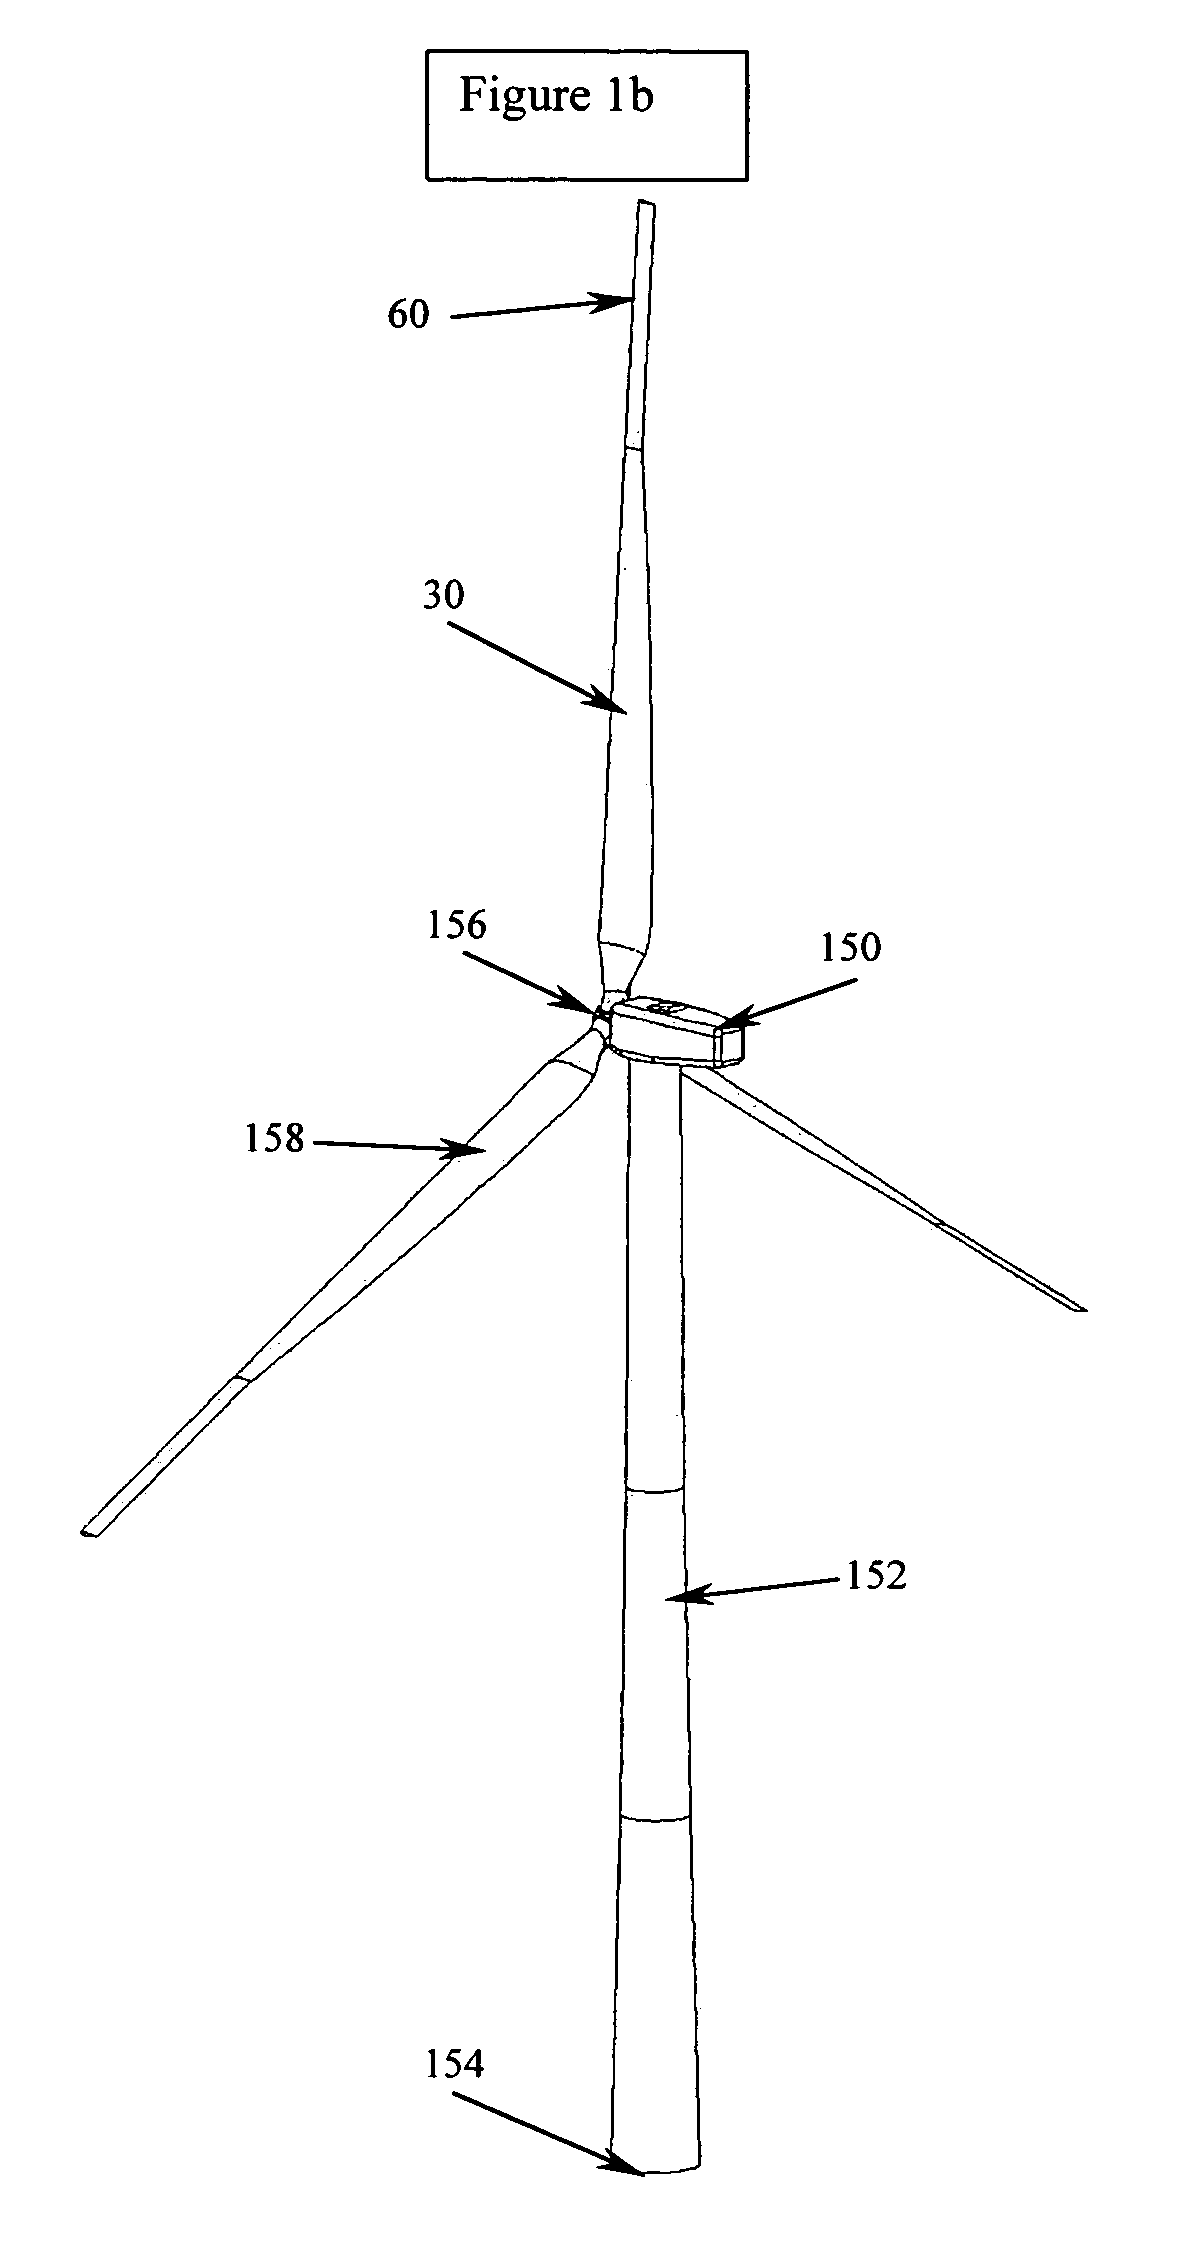 Mechanism for extendable rotor blades for power generating wind and ocean current turbines and means for counter-balancing the extendable rotor blade